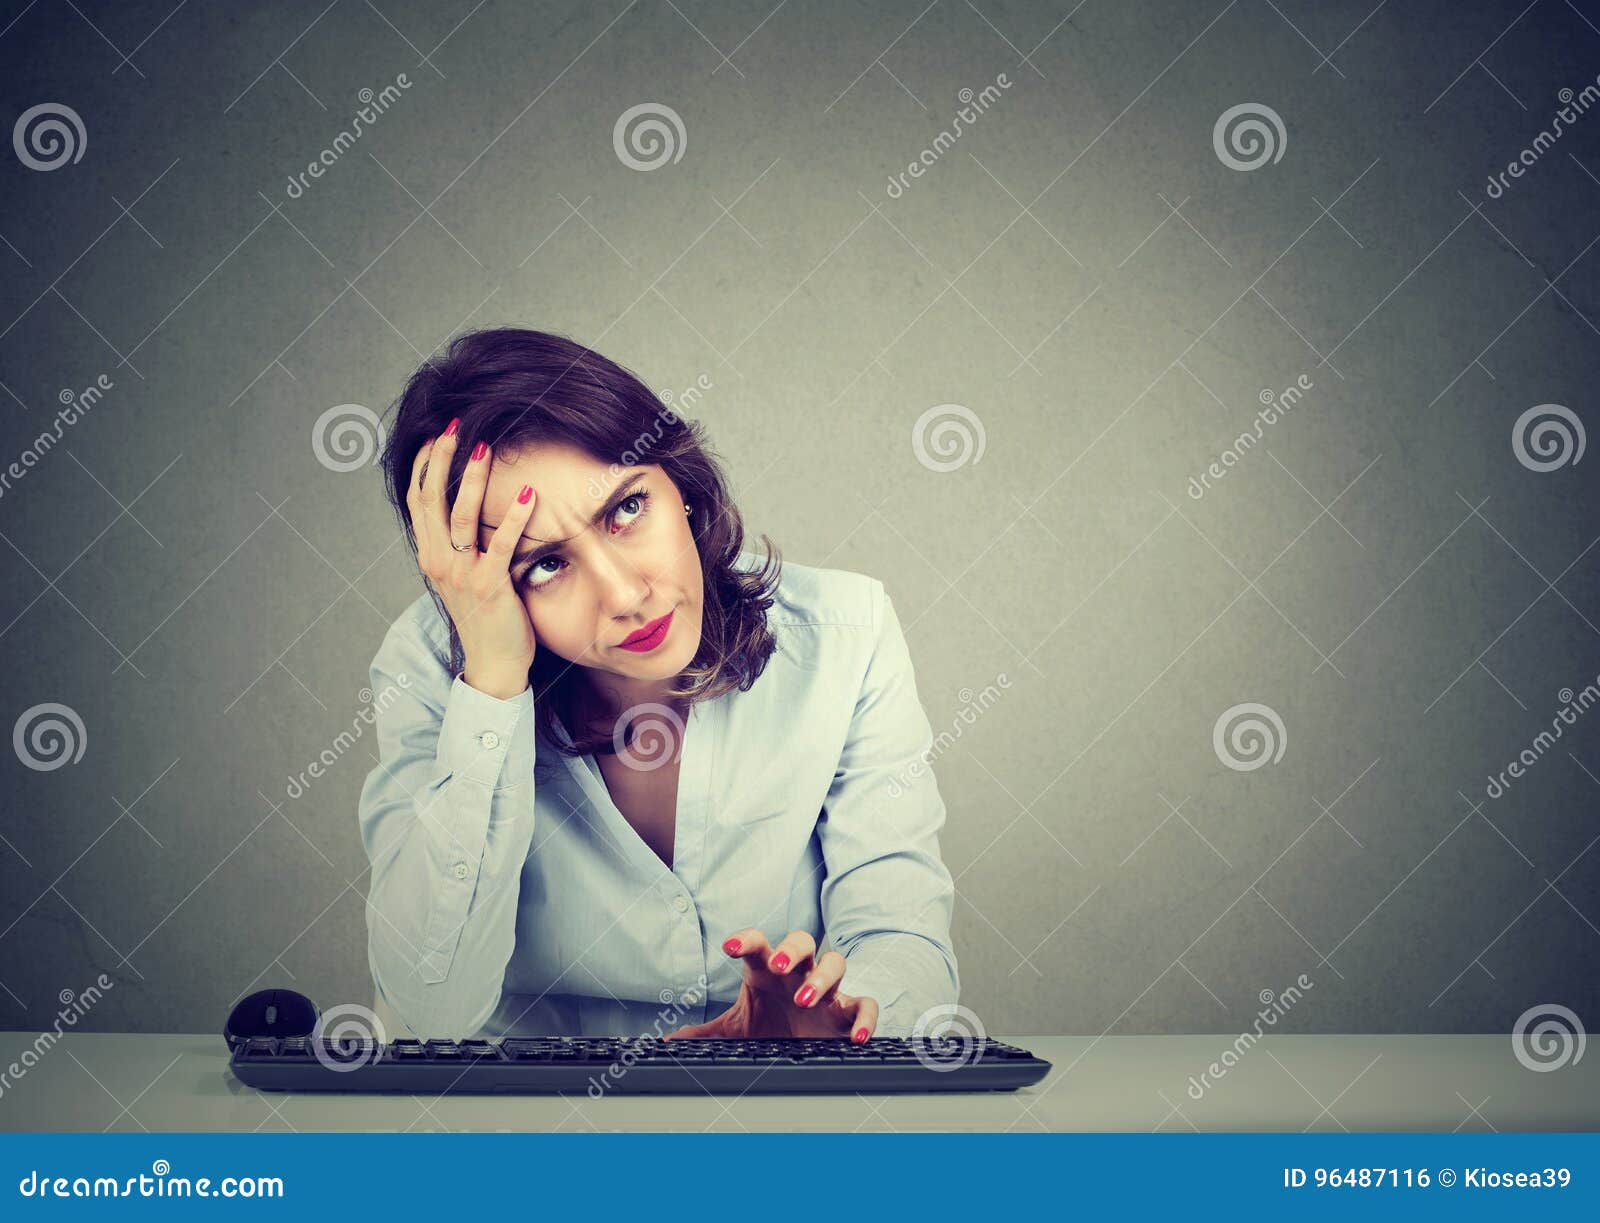 desperate woman trying to log into her computer forgot password